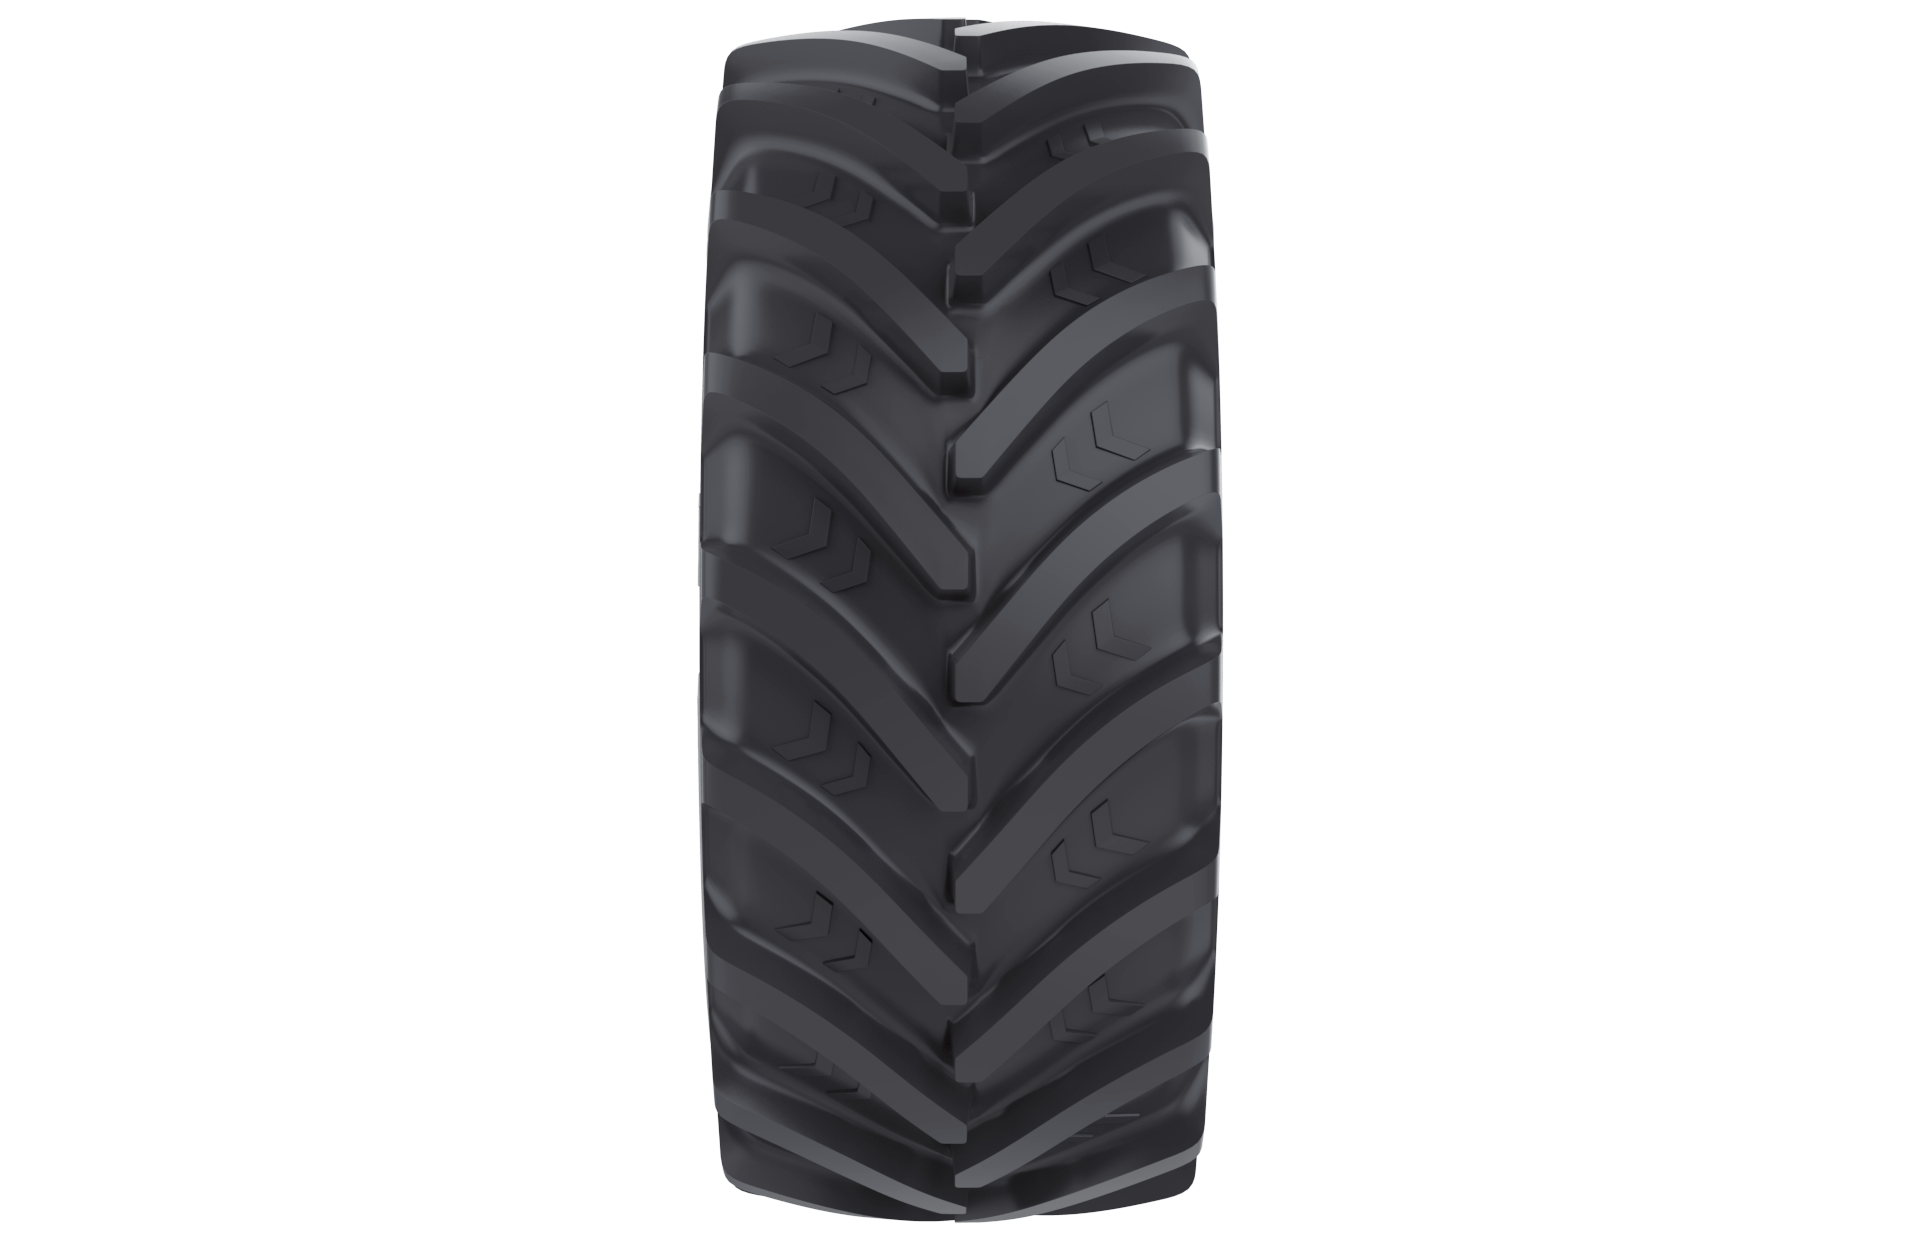 ASCENSO VF 650/65R42 NRO 174D R1-W TL VDR2000 STEEL BELTED